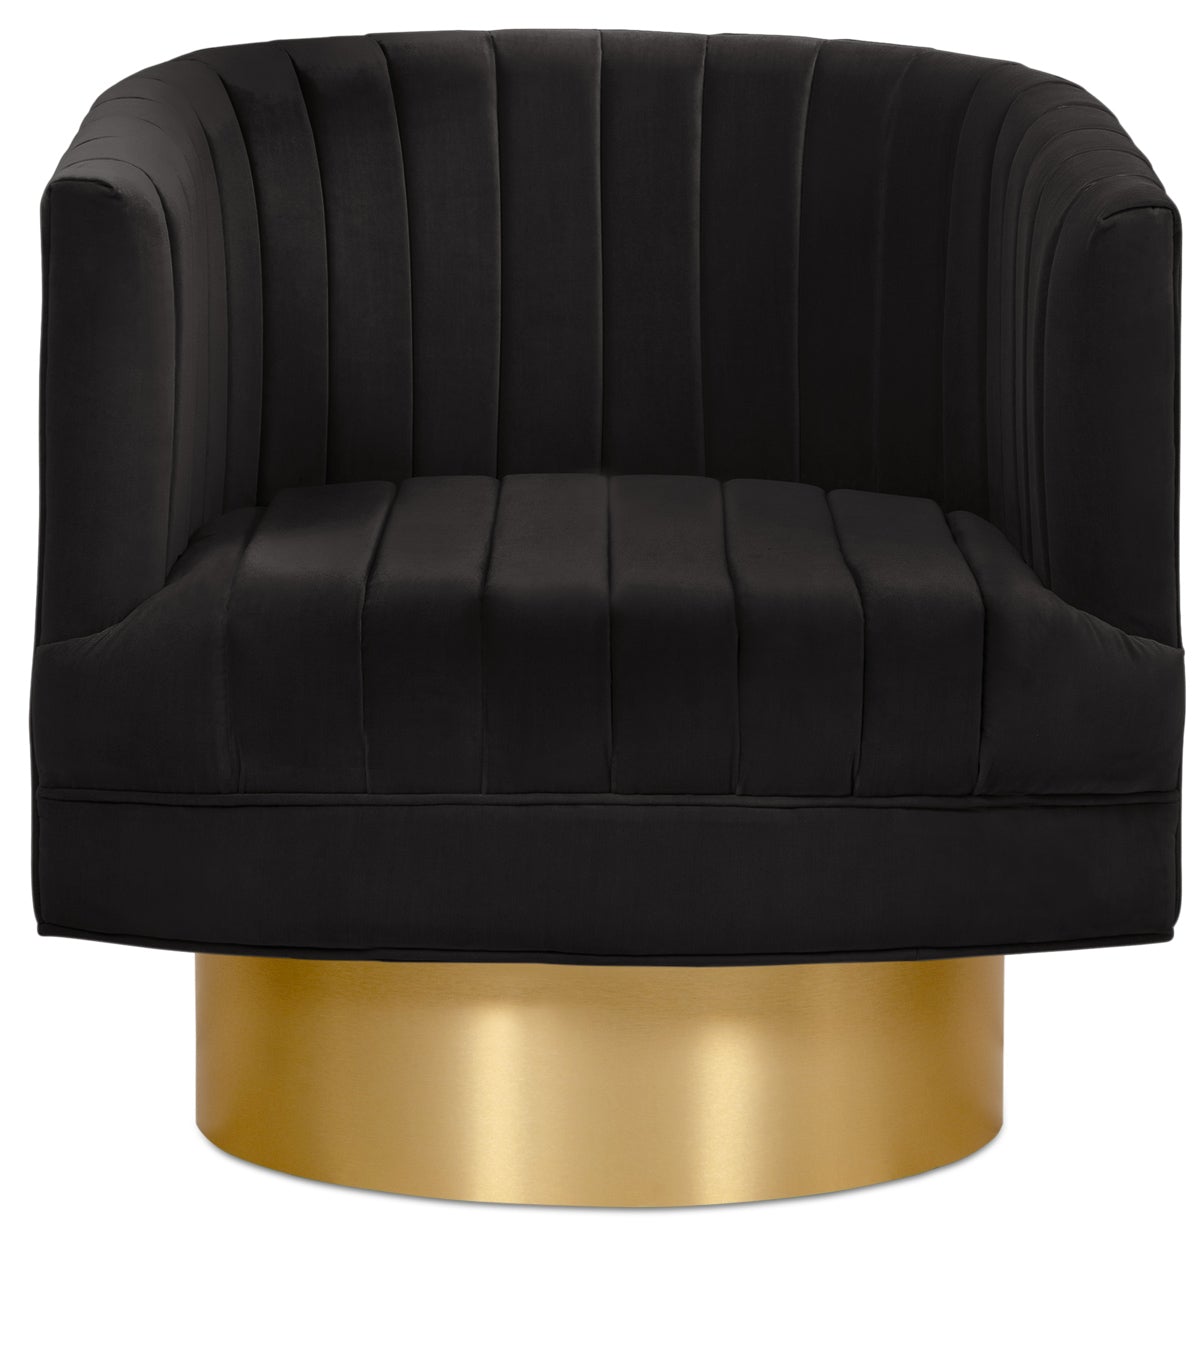 Club Chair in Channel Tufted Velvet - ModShop1.com